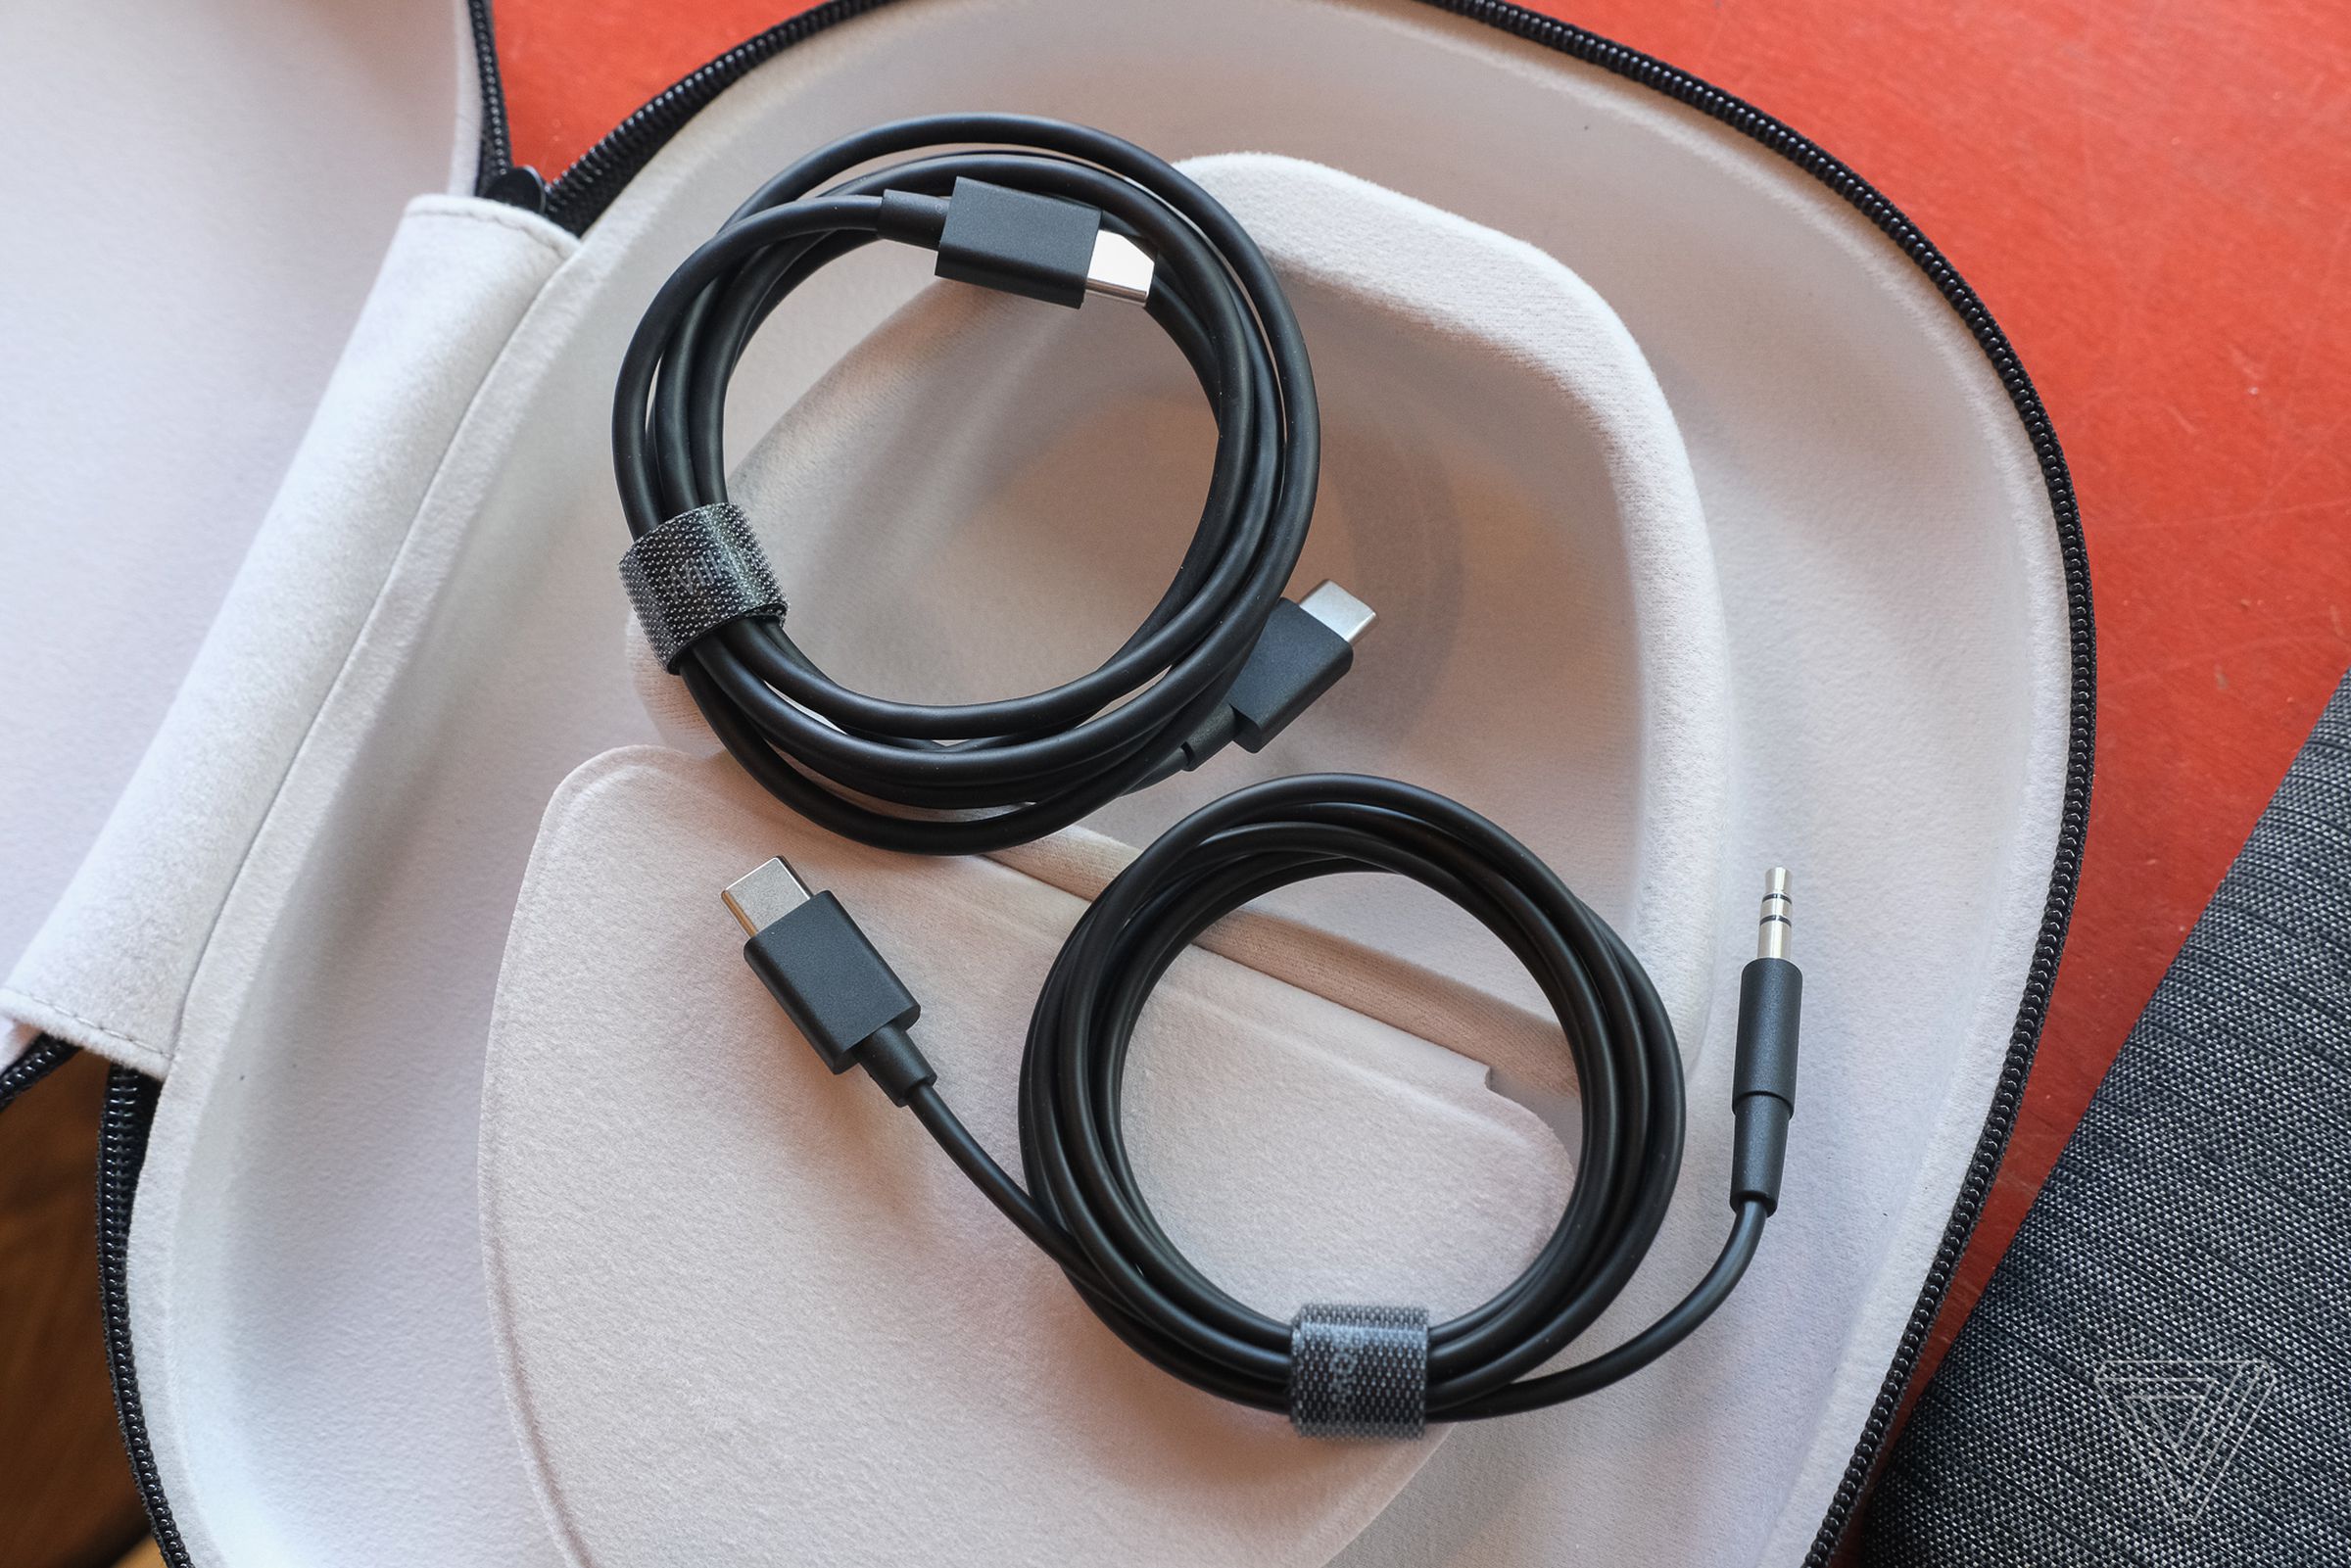 Bowers & Wilkins includes a regular USB-C cable and also a USB-C-to-3.5mm cable.